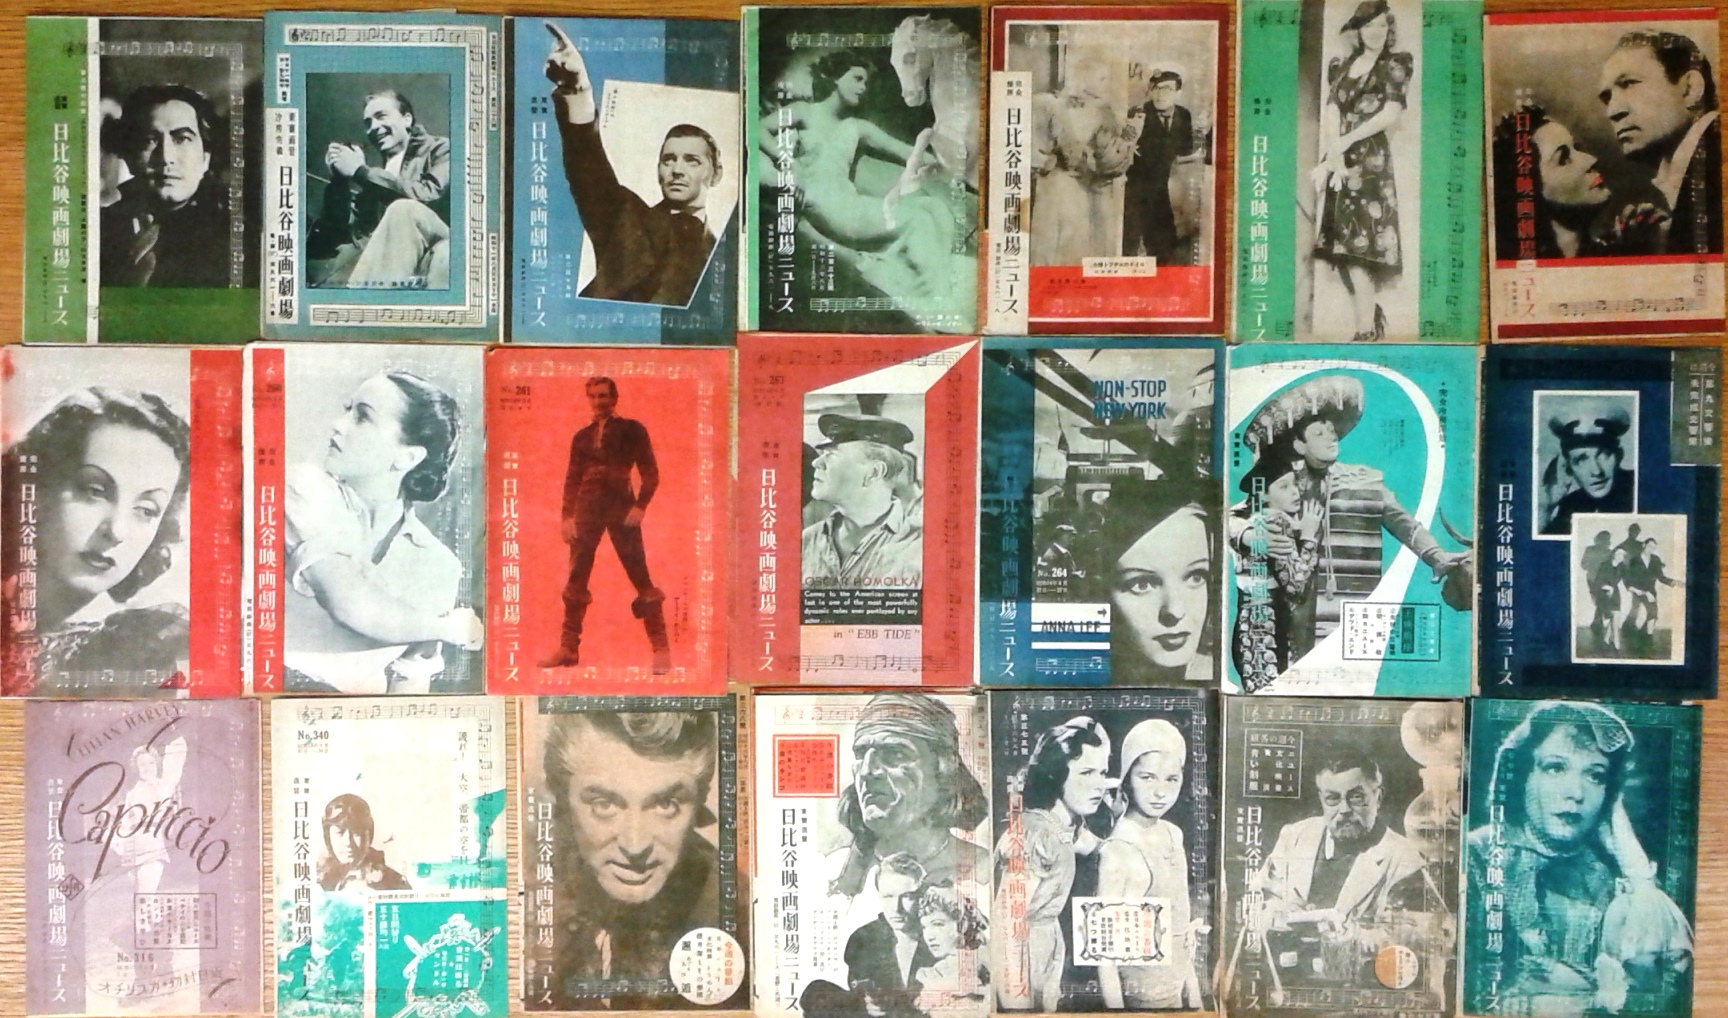 Film Ephemera from the Makino Collection, Columbia University in the City of New York.